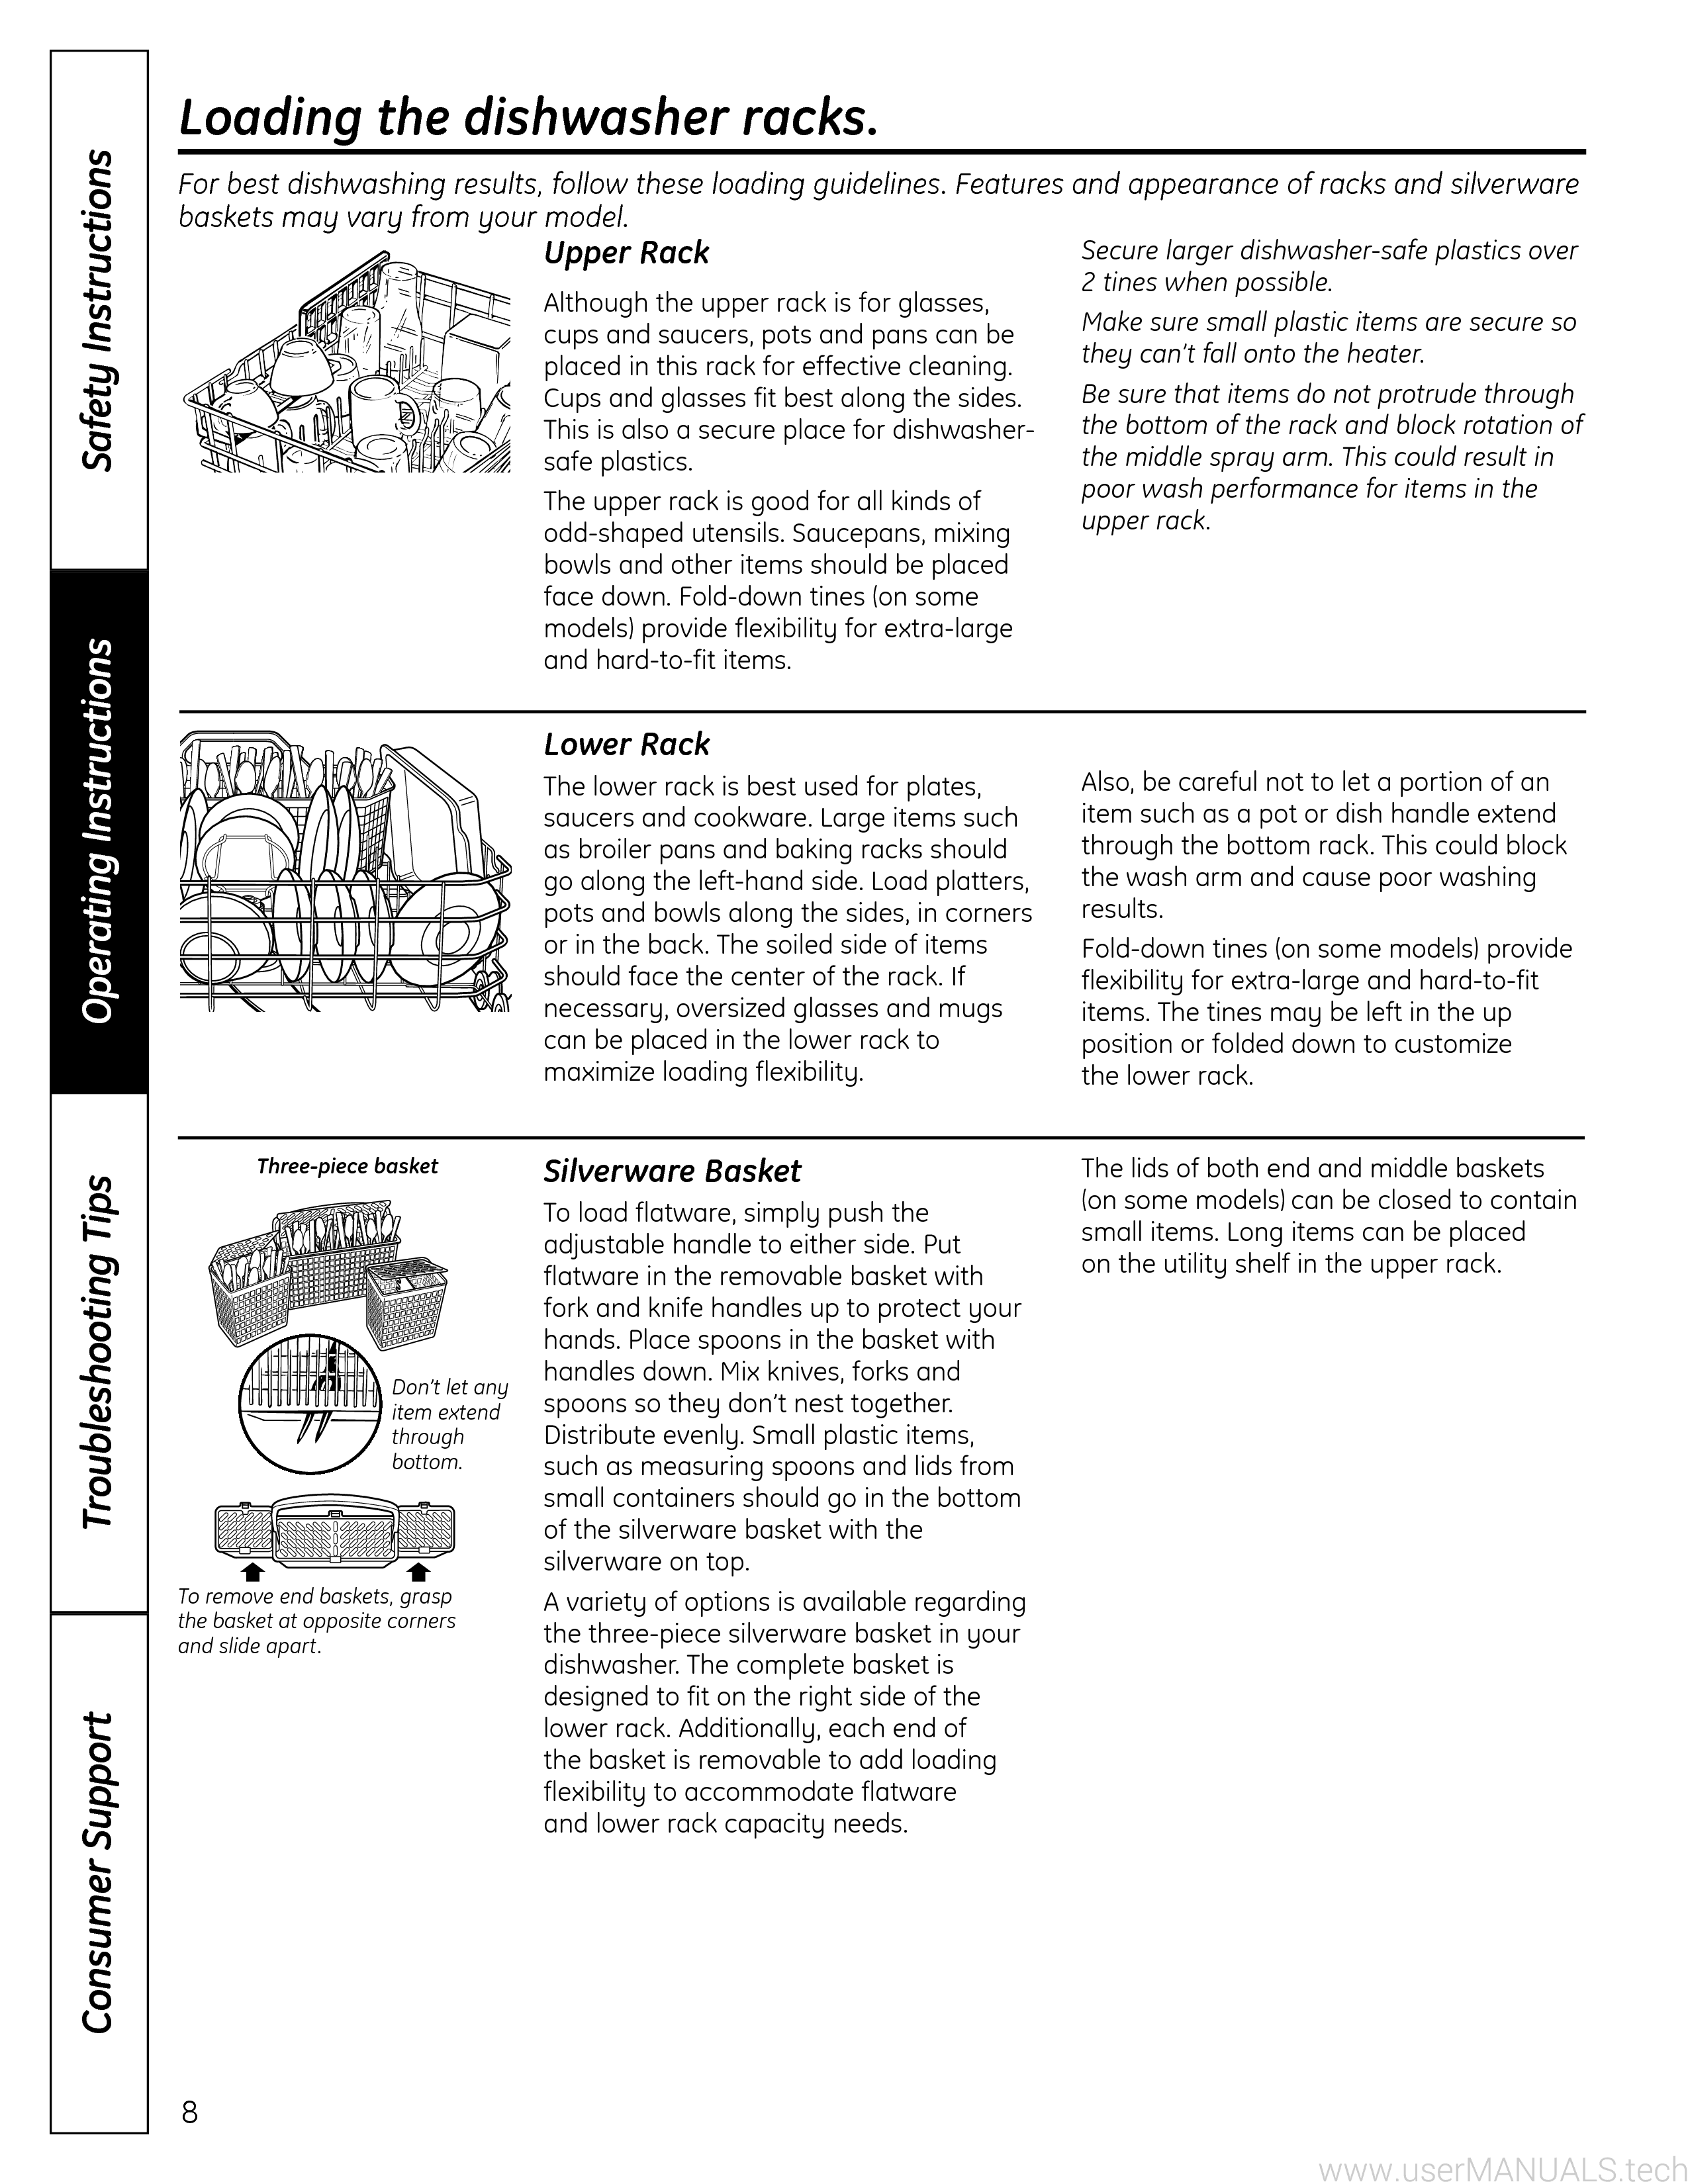 GE Quiet Power 3 Owners Manual